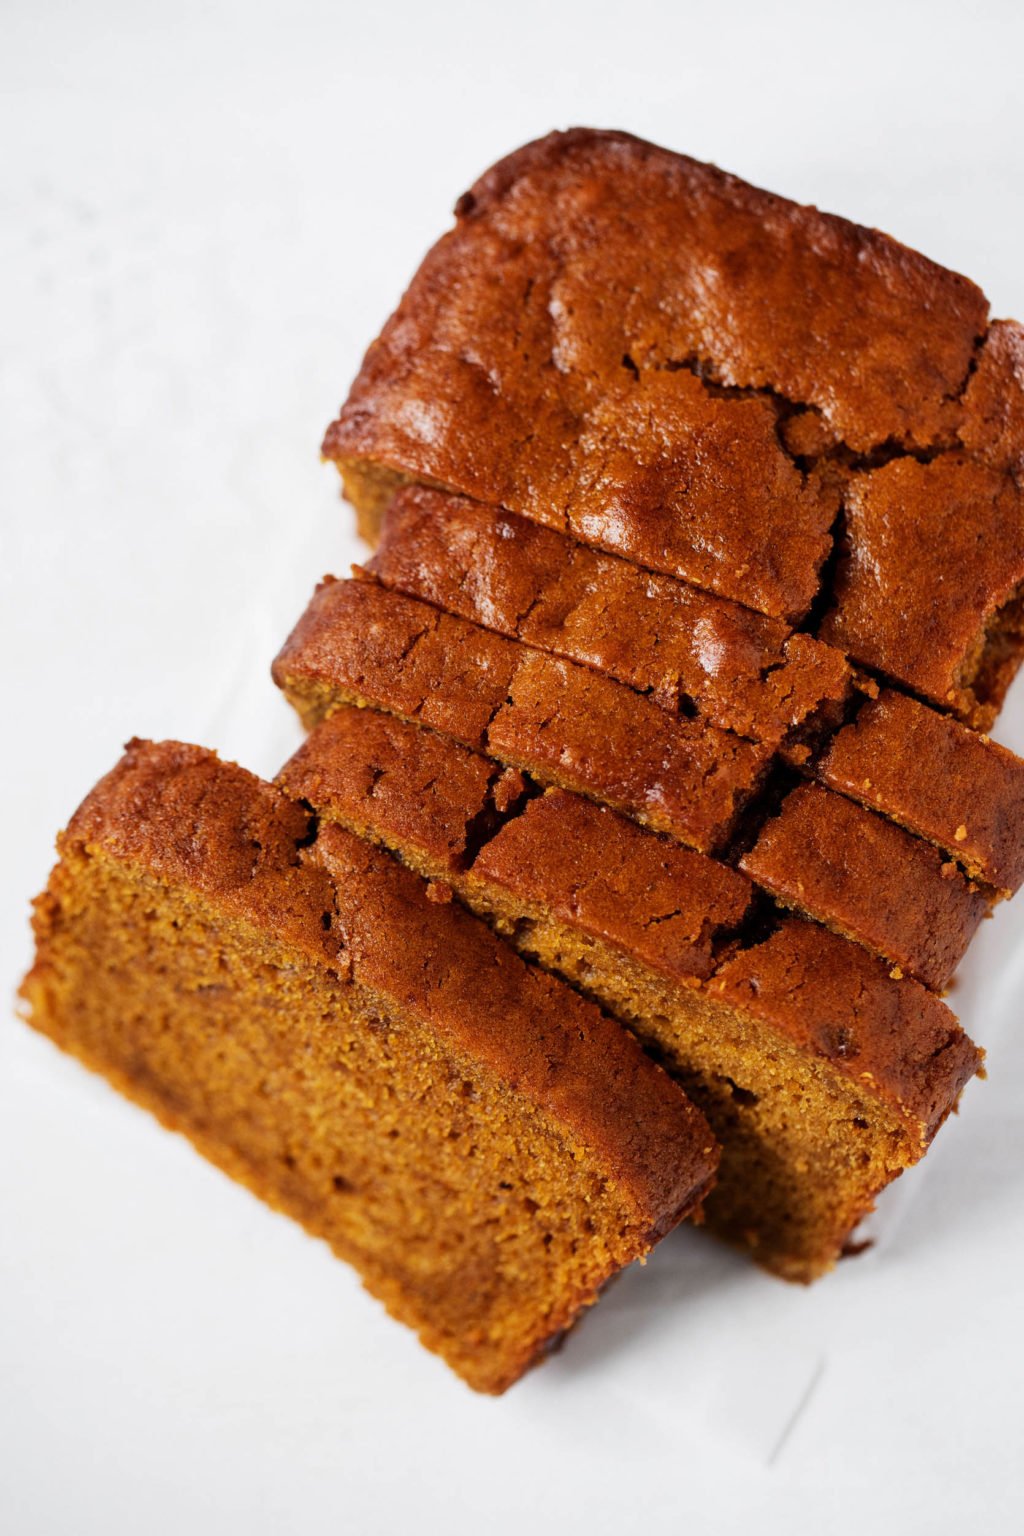 A loaf of classic vegan pumpkin bread, partially sliced and golden brown on top.